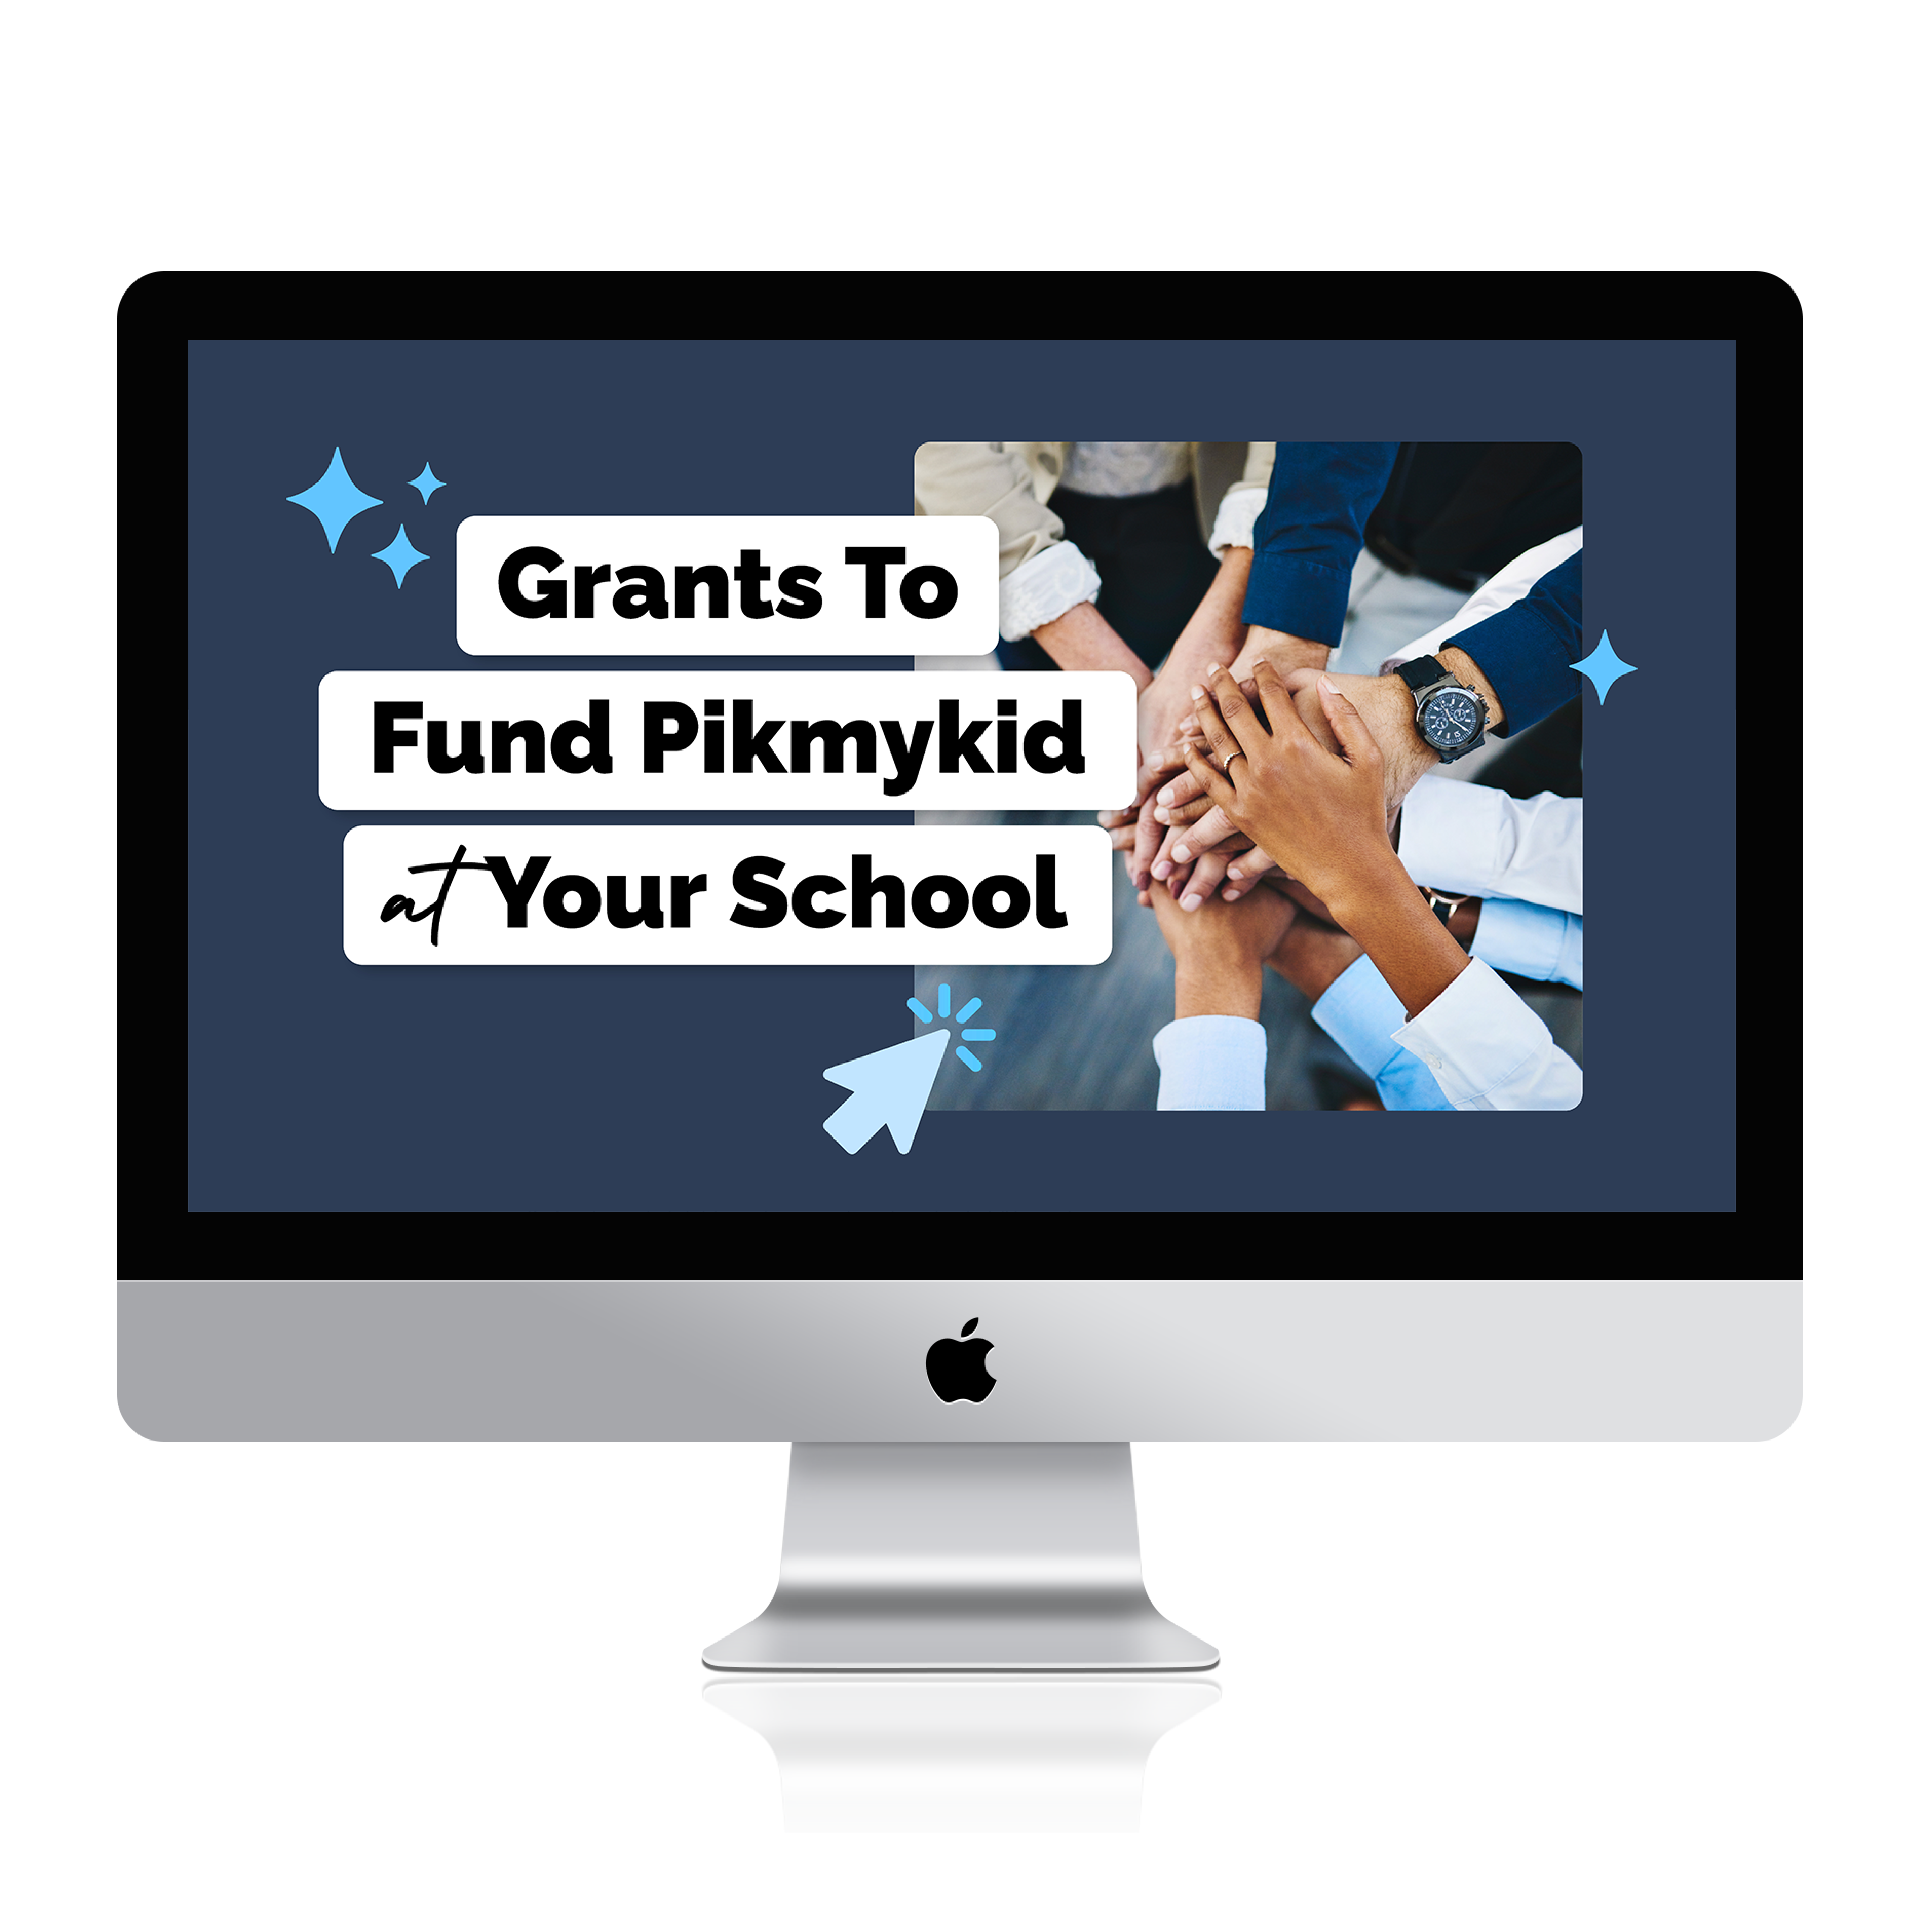 Guide to Fund Pikmykid at your school